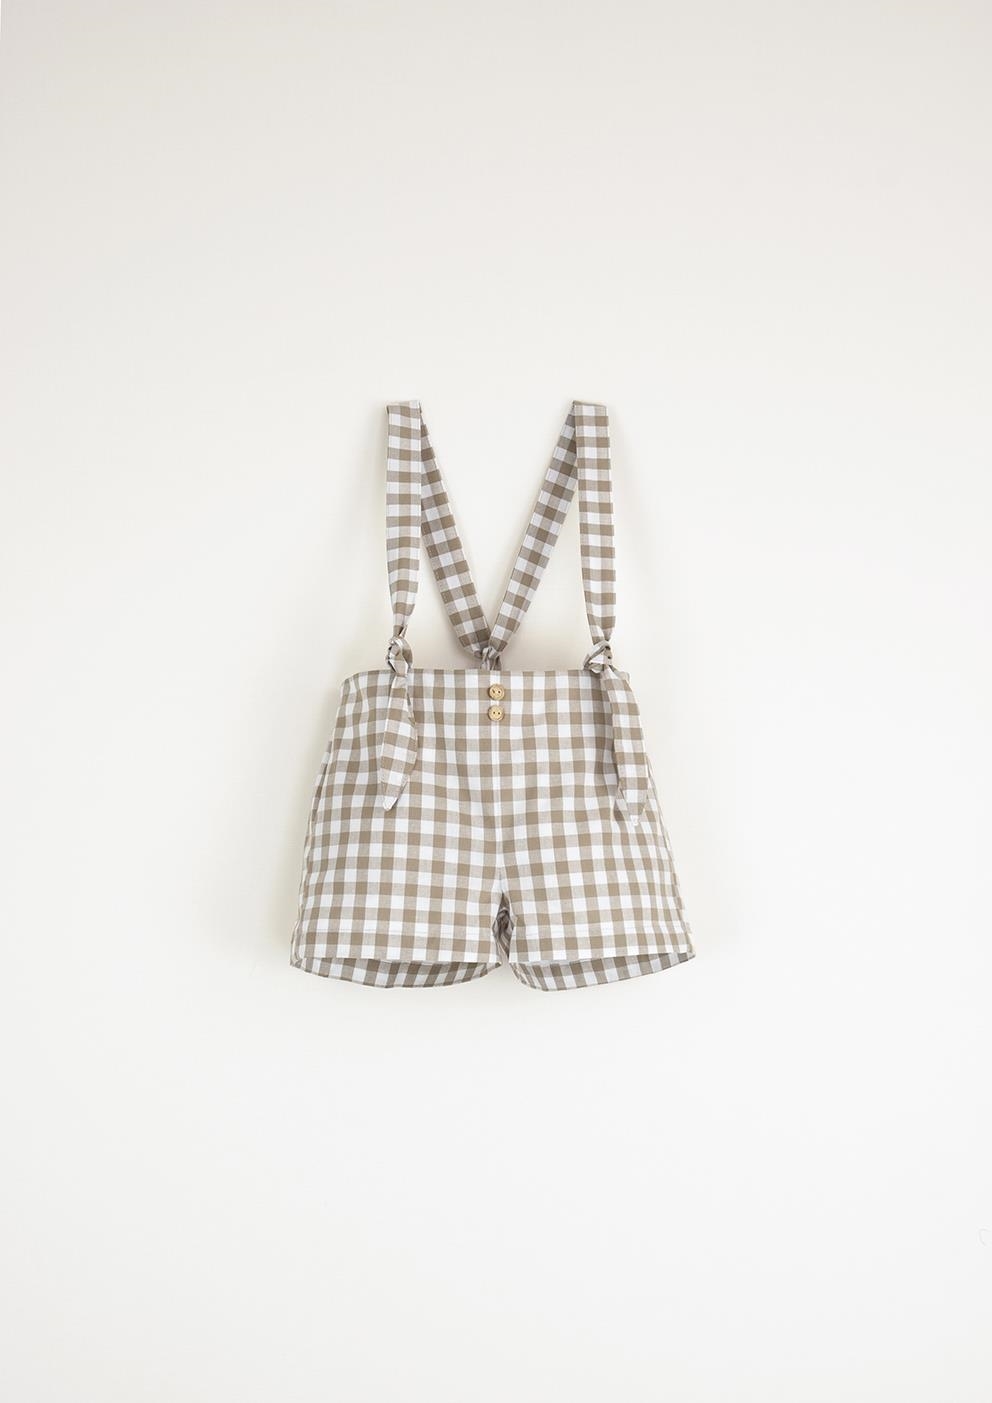 Mod.15.5 Gingham dungarees with removable straps | SS23 Mod.15.5 Gingham dungarees with removable straps